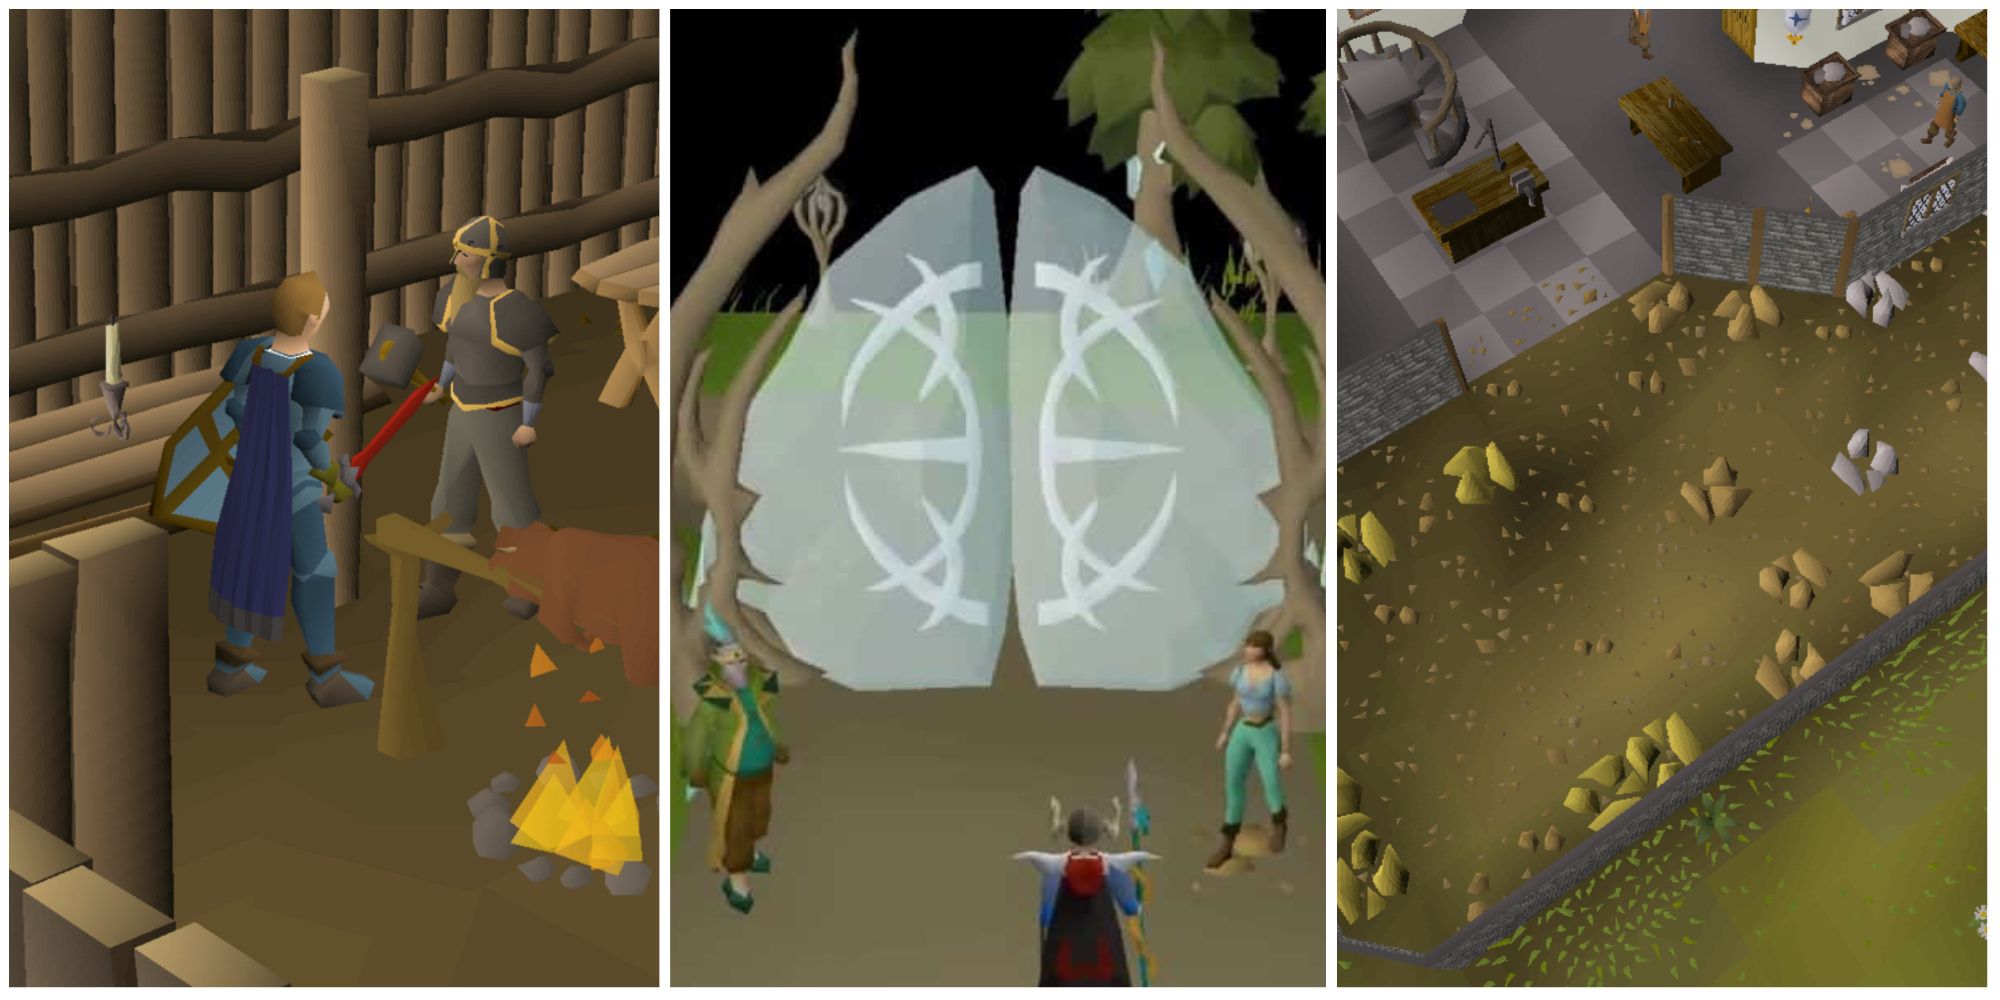 Old School RuneScape split feature image featuring screenshots of the Longhall at Rellekka, the gate to Prifddinas, and the Crafting Guild 